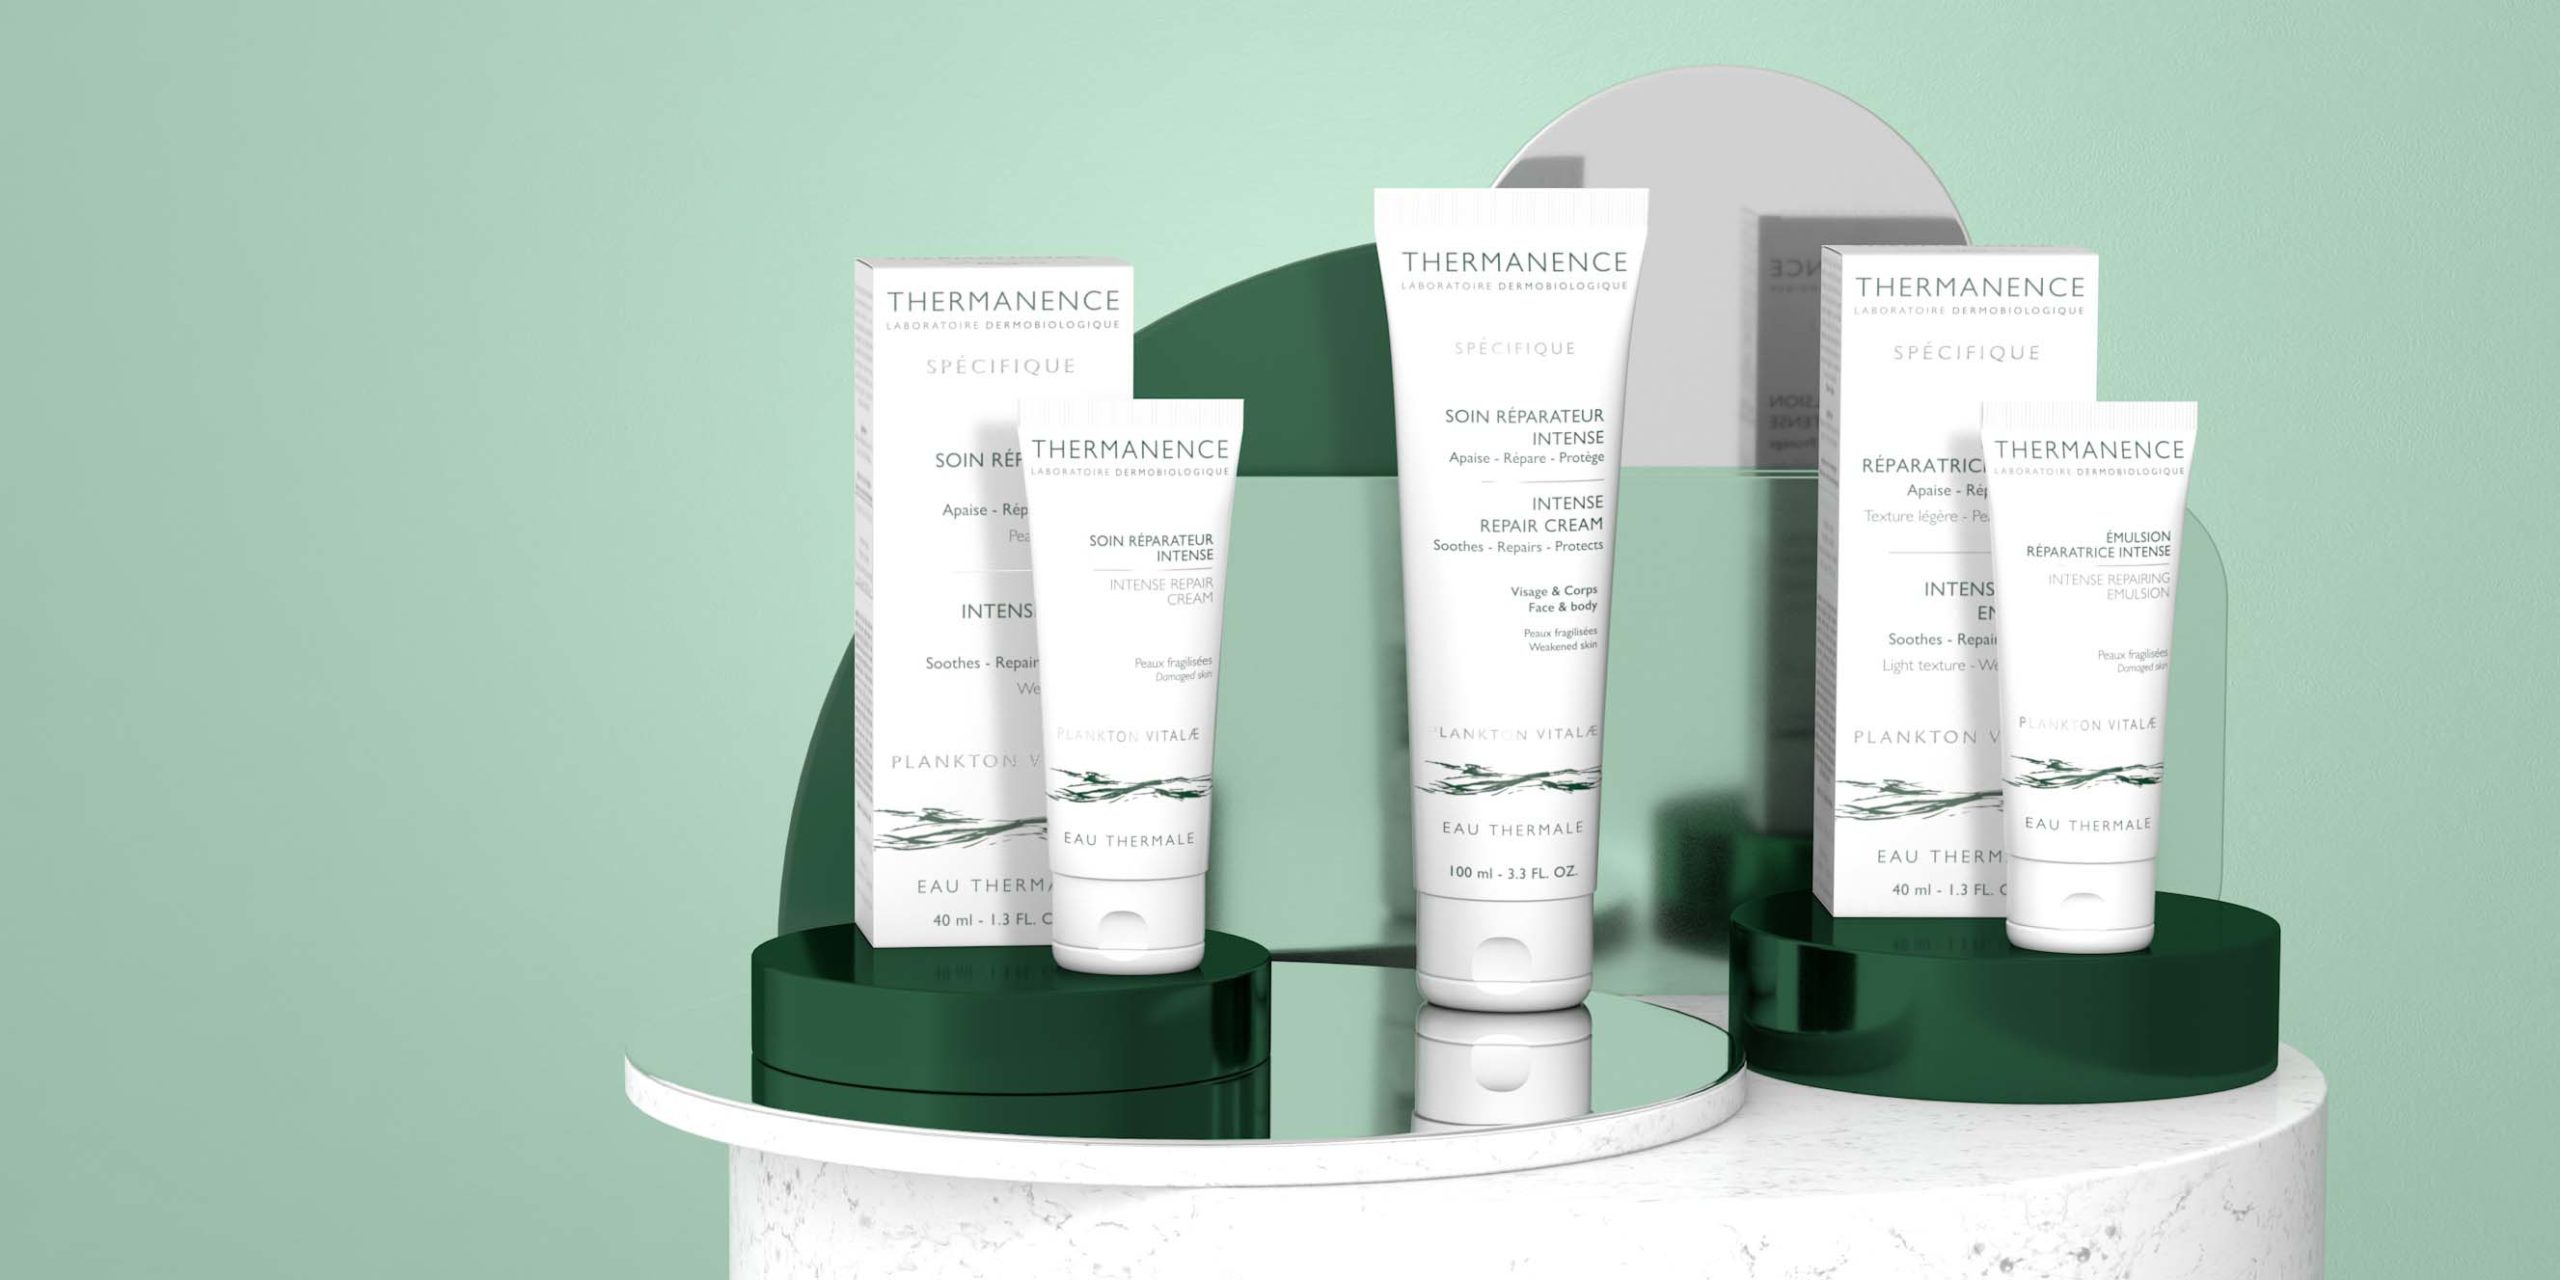 THERMANENCE-Packaging-Ambiance-Specifique-01